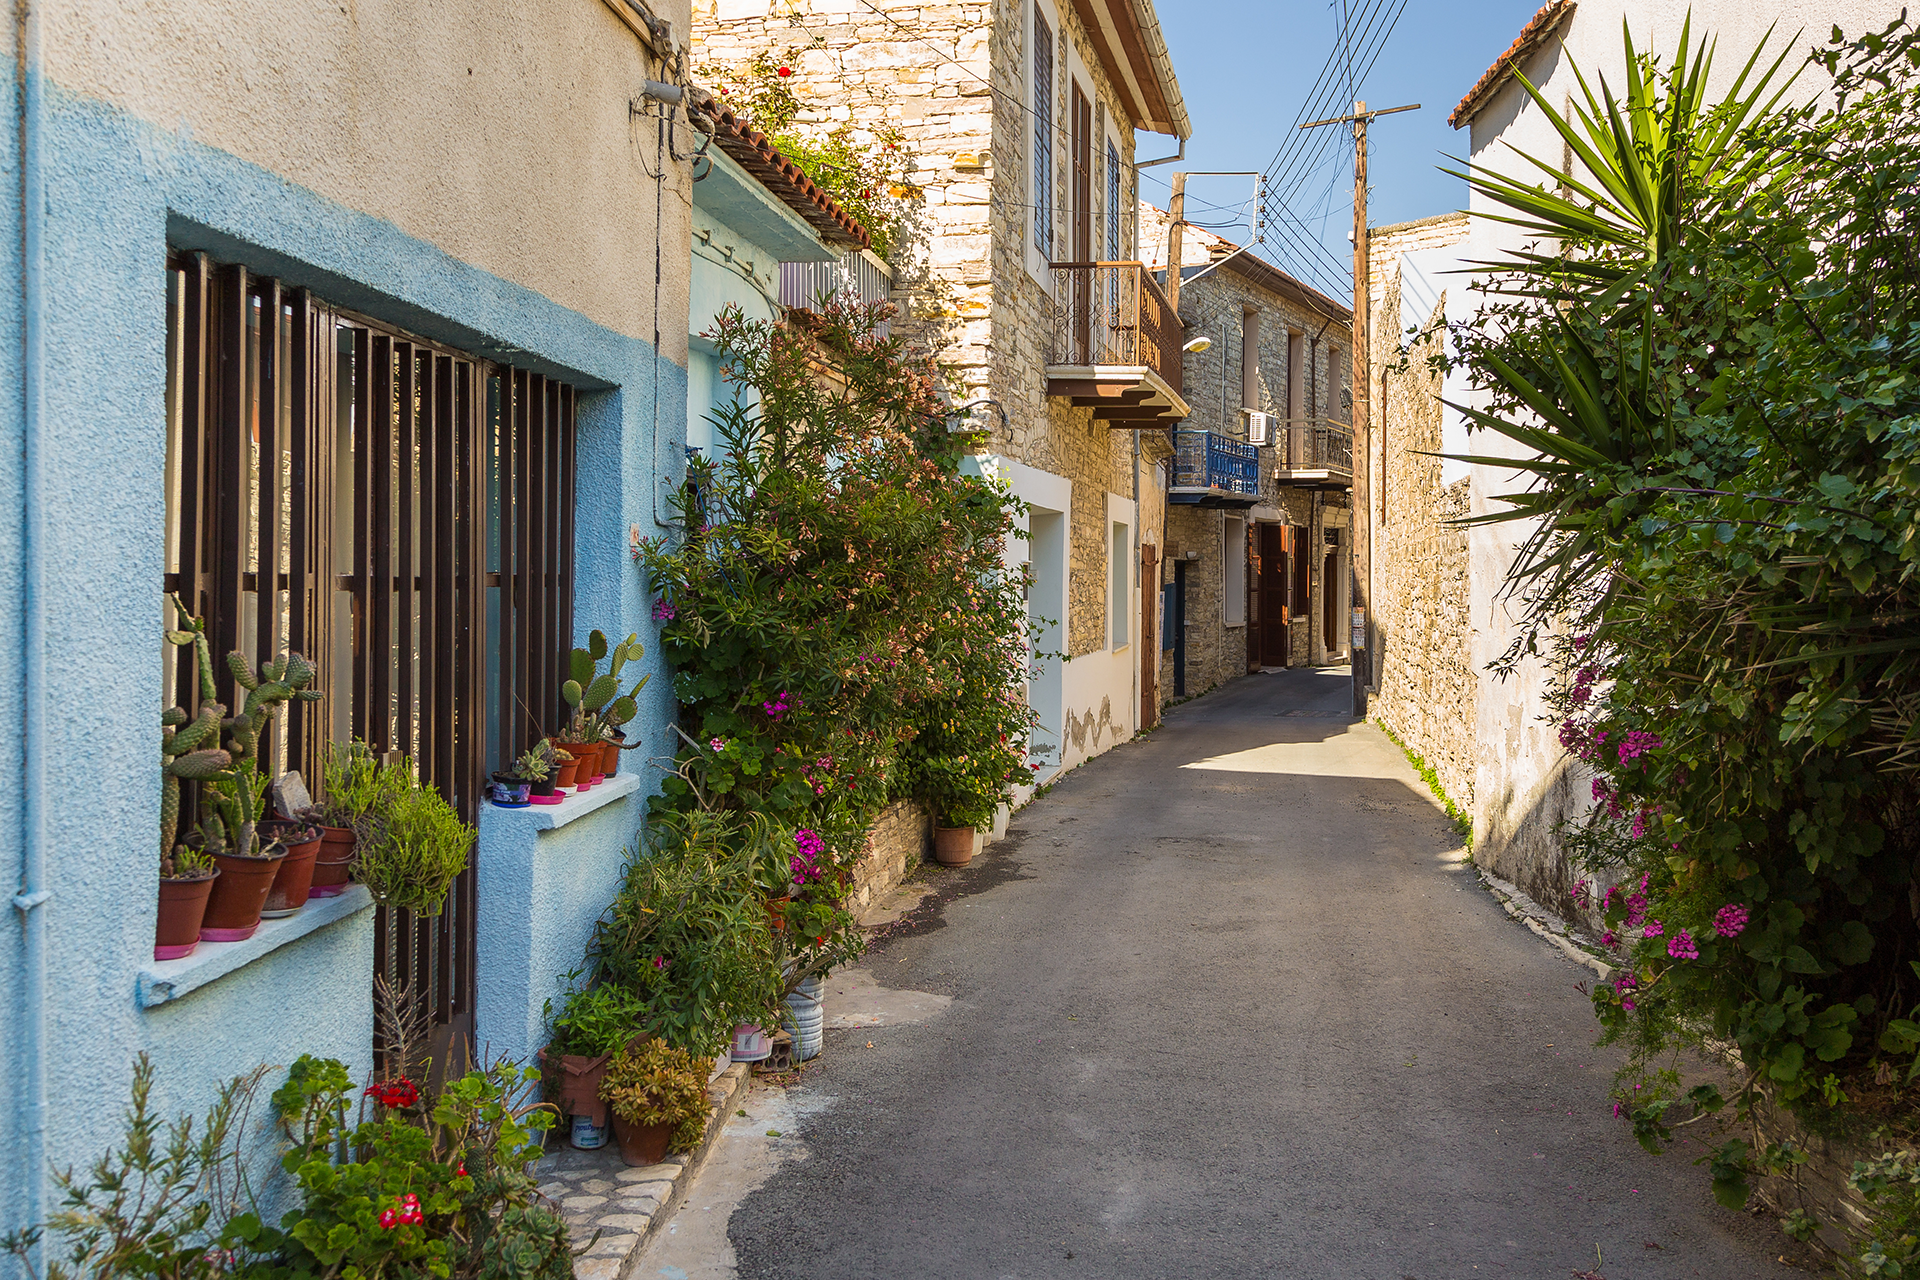 Lefkara village's charm is in its cute streets that wind through the picturesque houses, creating a serene atmosphere that's perfect for a leisurely stroll